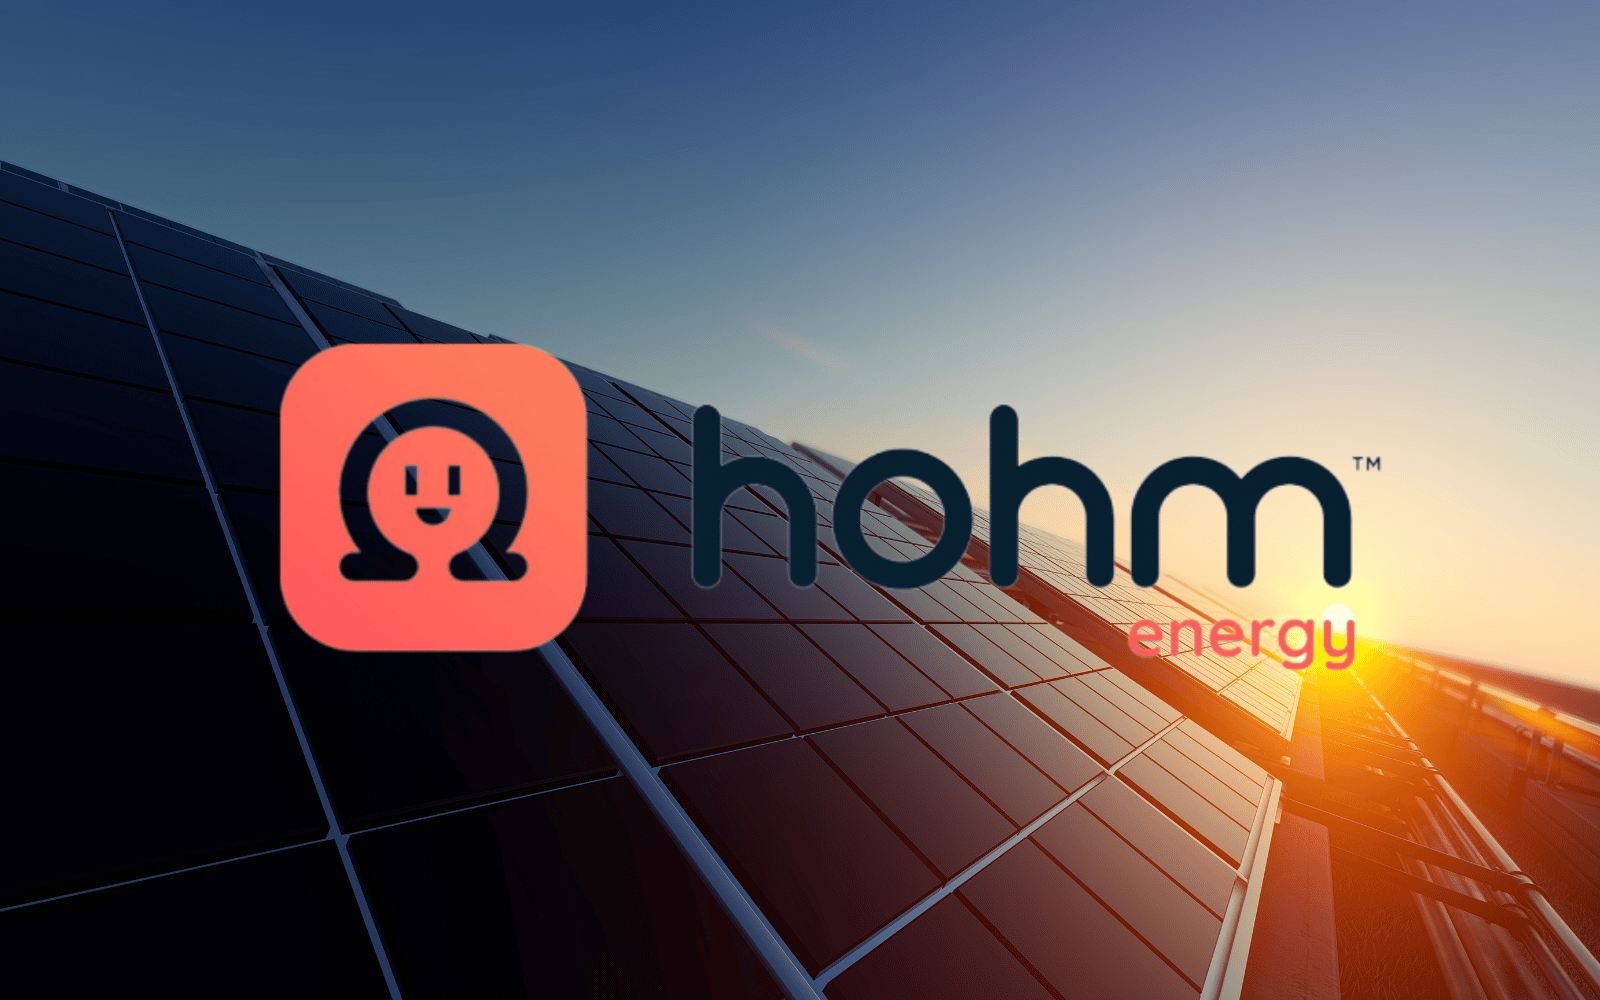 Hohm Energy, a South African climate-tech company, secures $8 million to expand the adoption of rooftop solar